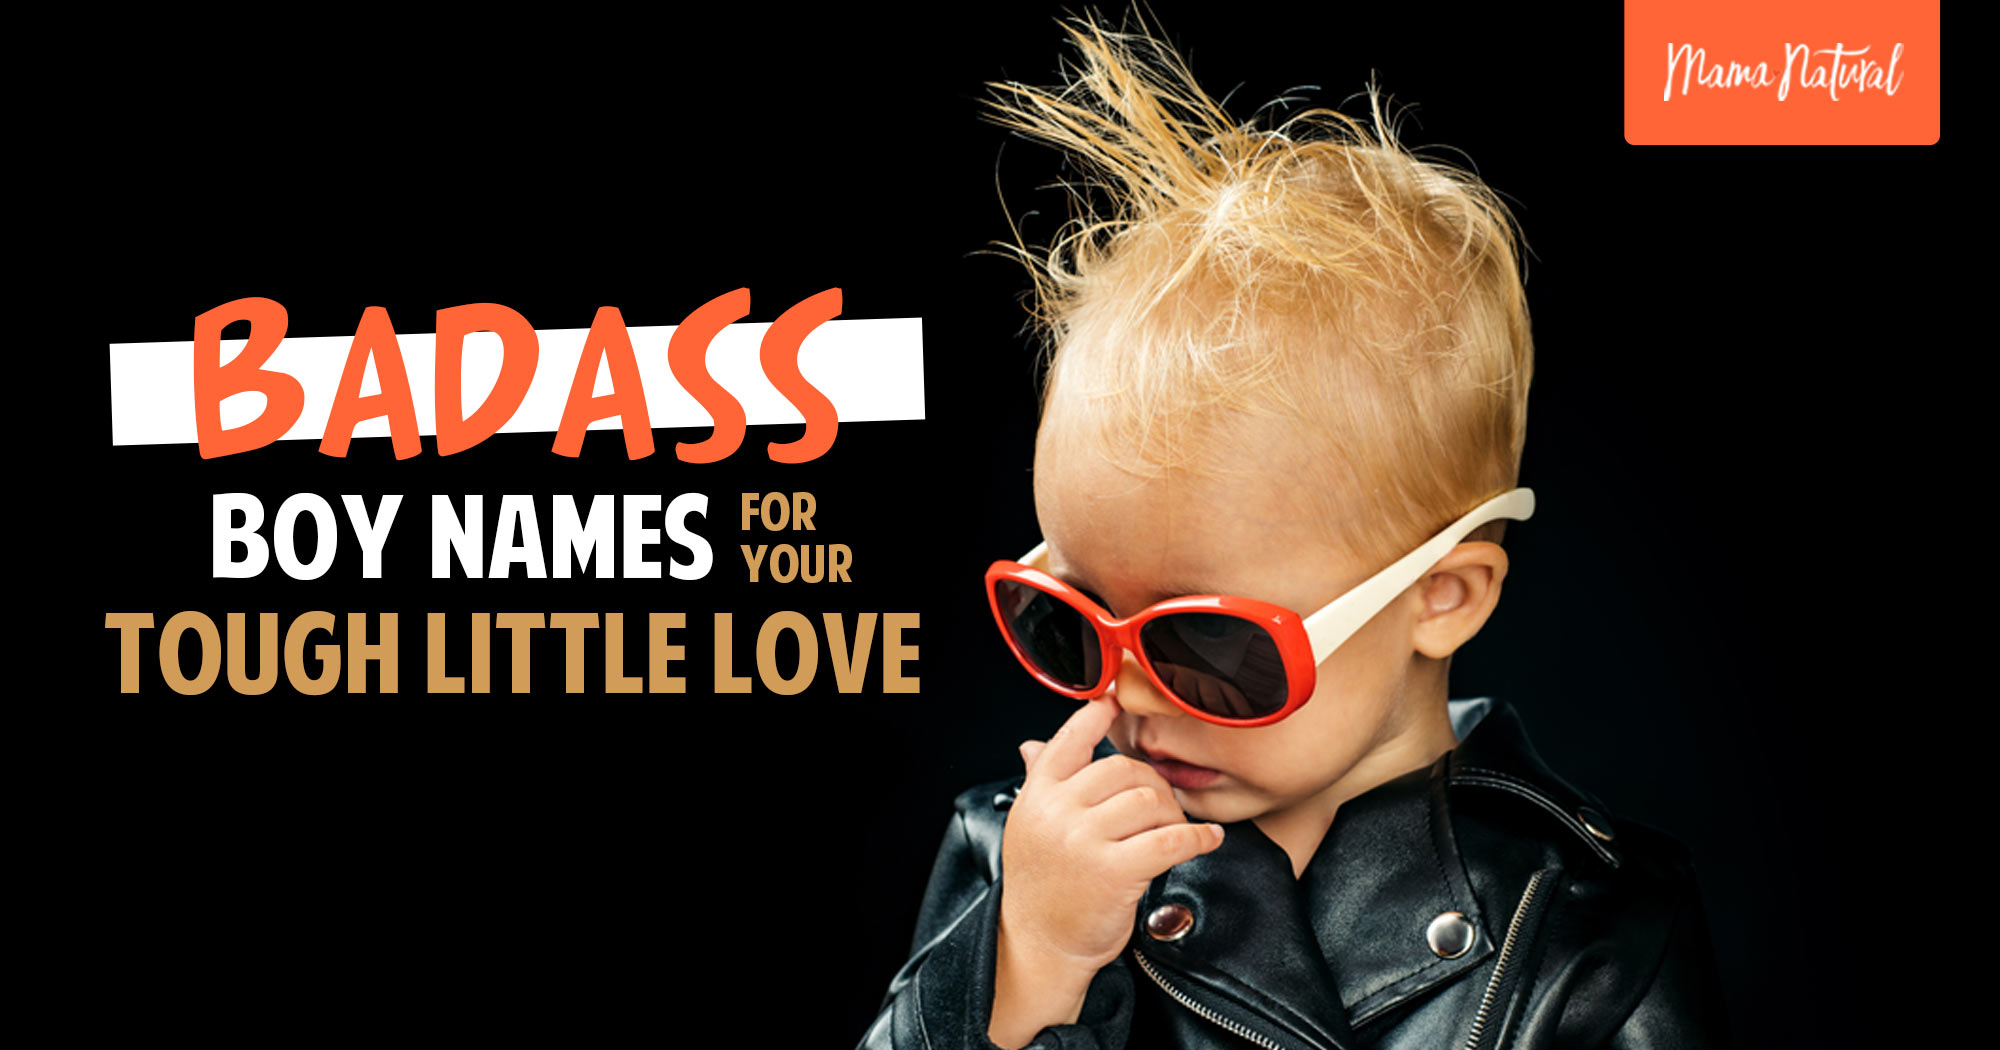 Badass Boy Names for Your Tough Little Love - Mama Natural